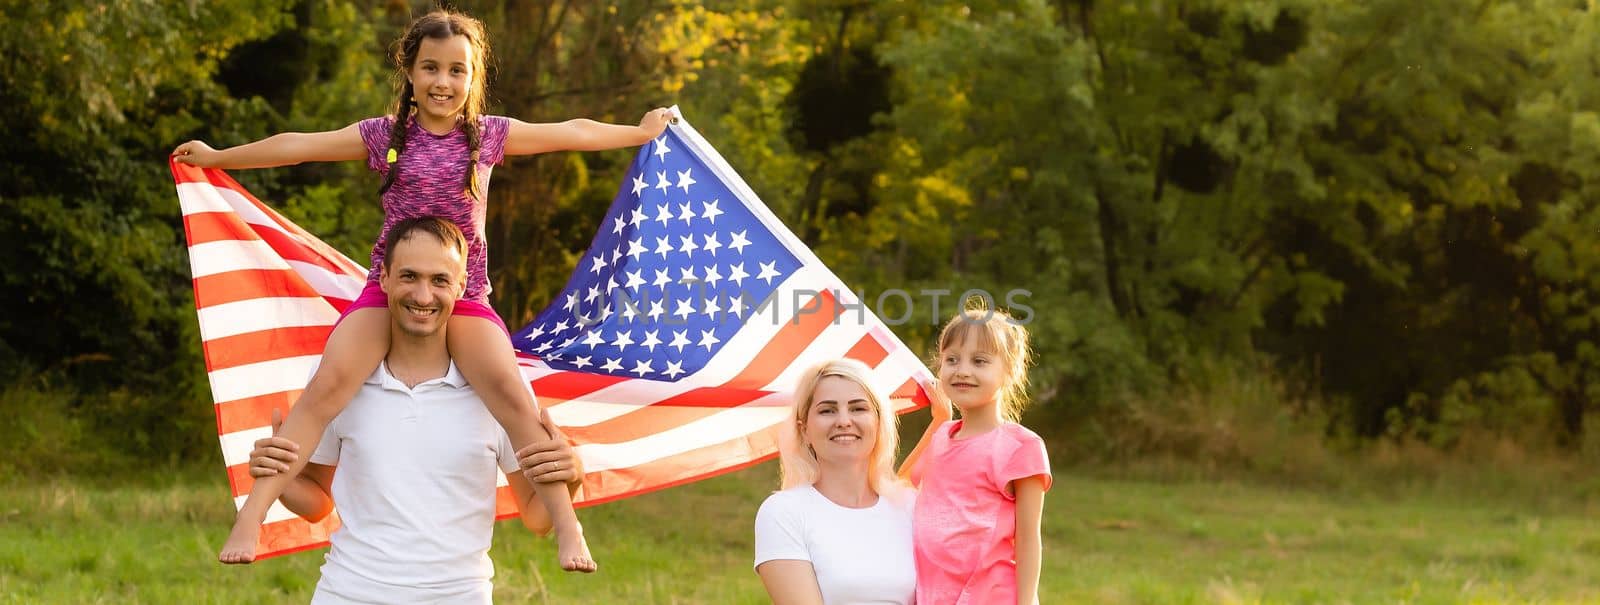 Happy family sitting together in their backyard holding the american flag behind them. Smiling couple with their kids celebrating american independence day holding american flag by Andelov13